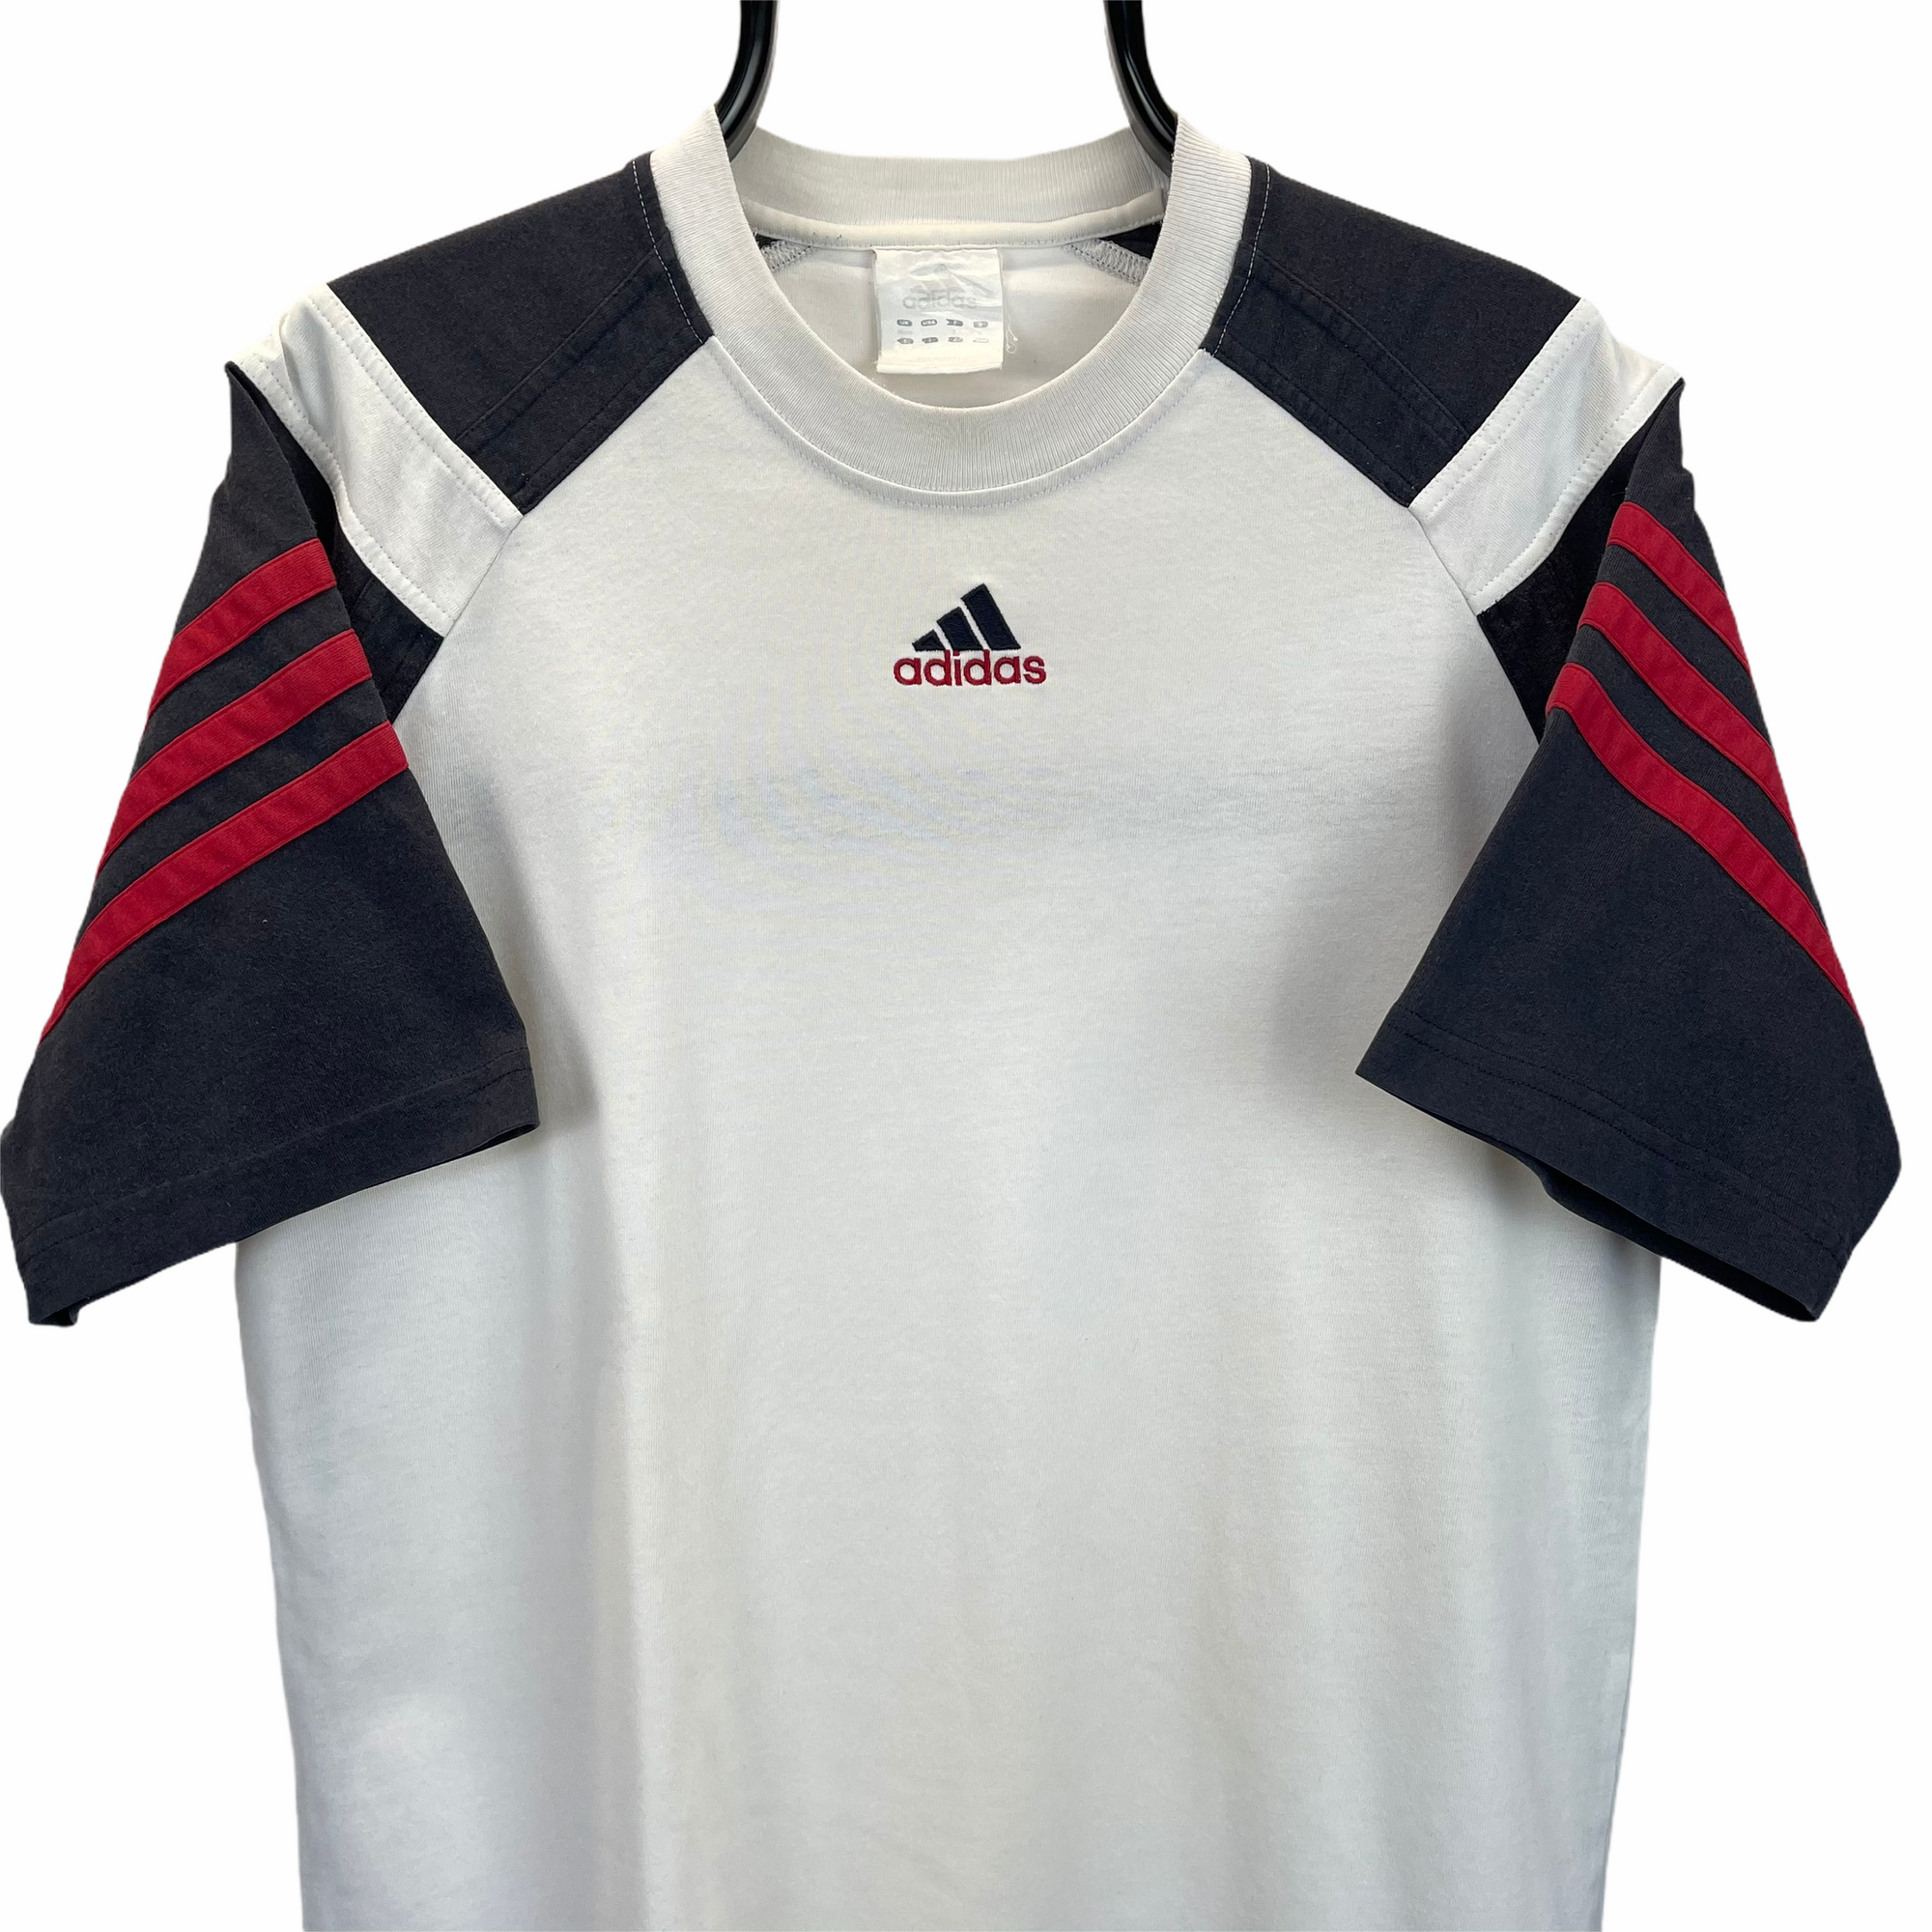 Vintage Adidas Embroidered Centre Logo Tee in White, Red & Black - Men's Medium/Women's Large